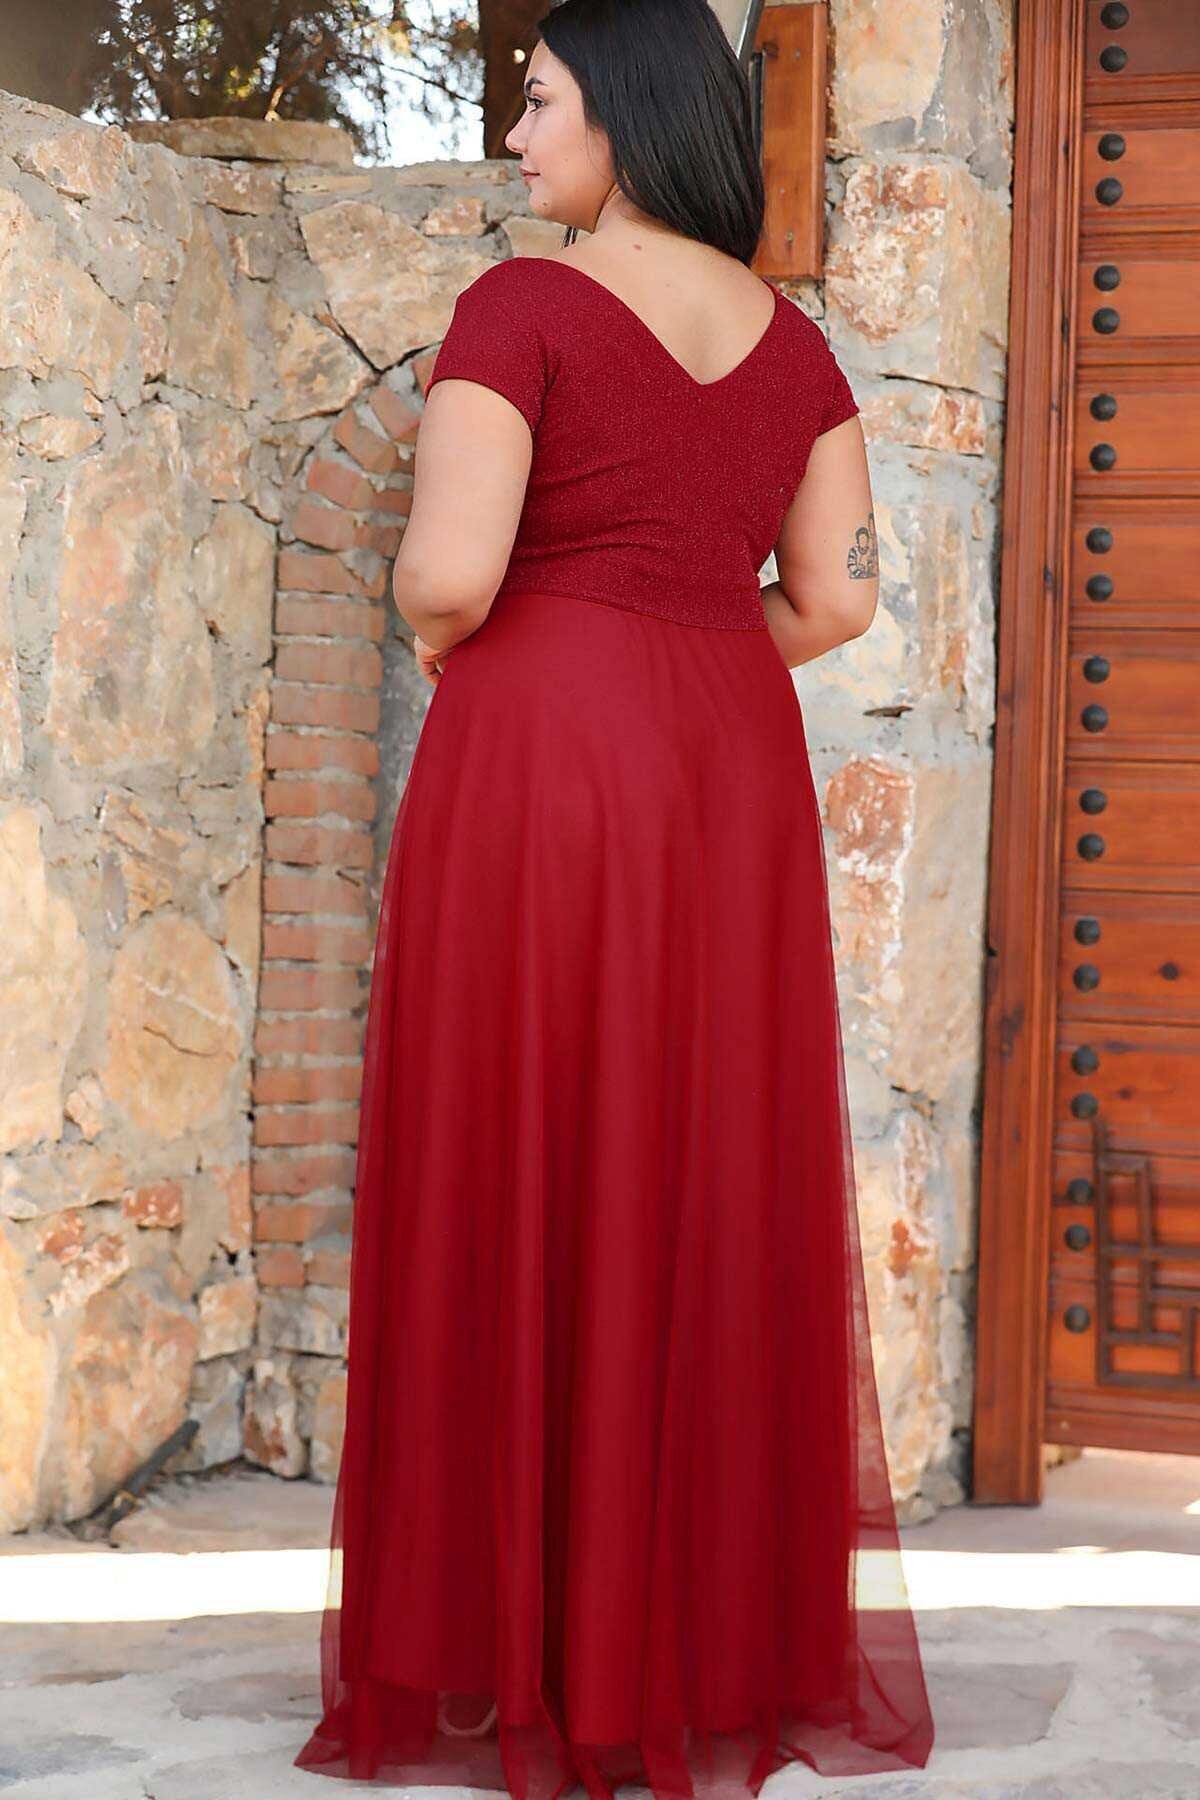 TULLE RED PLUS SIZE EVENING DRESS, GLITTER MAXI DRESS